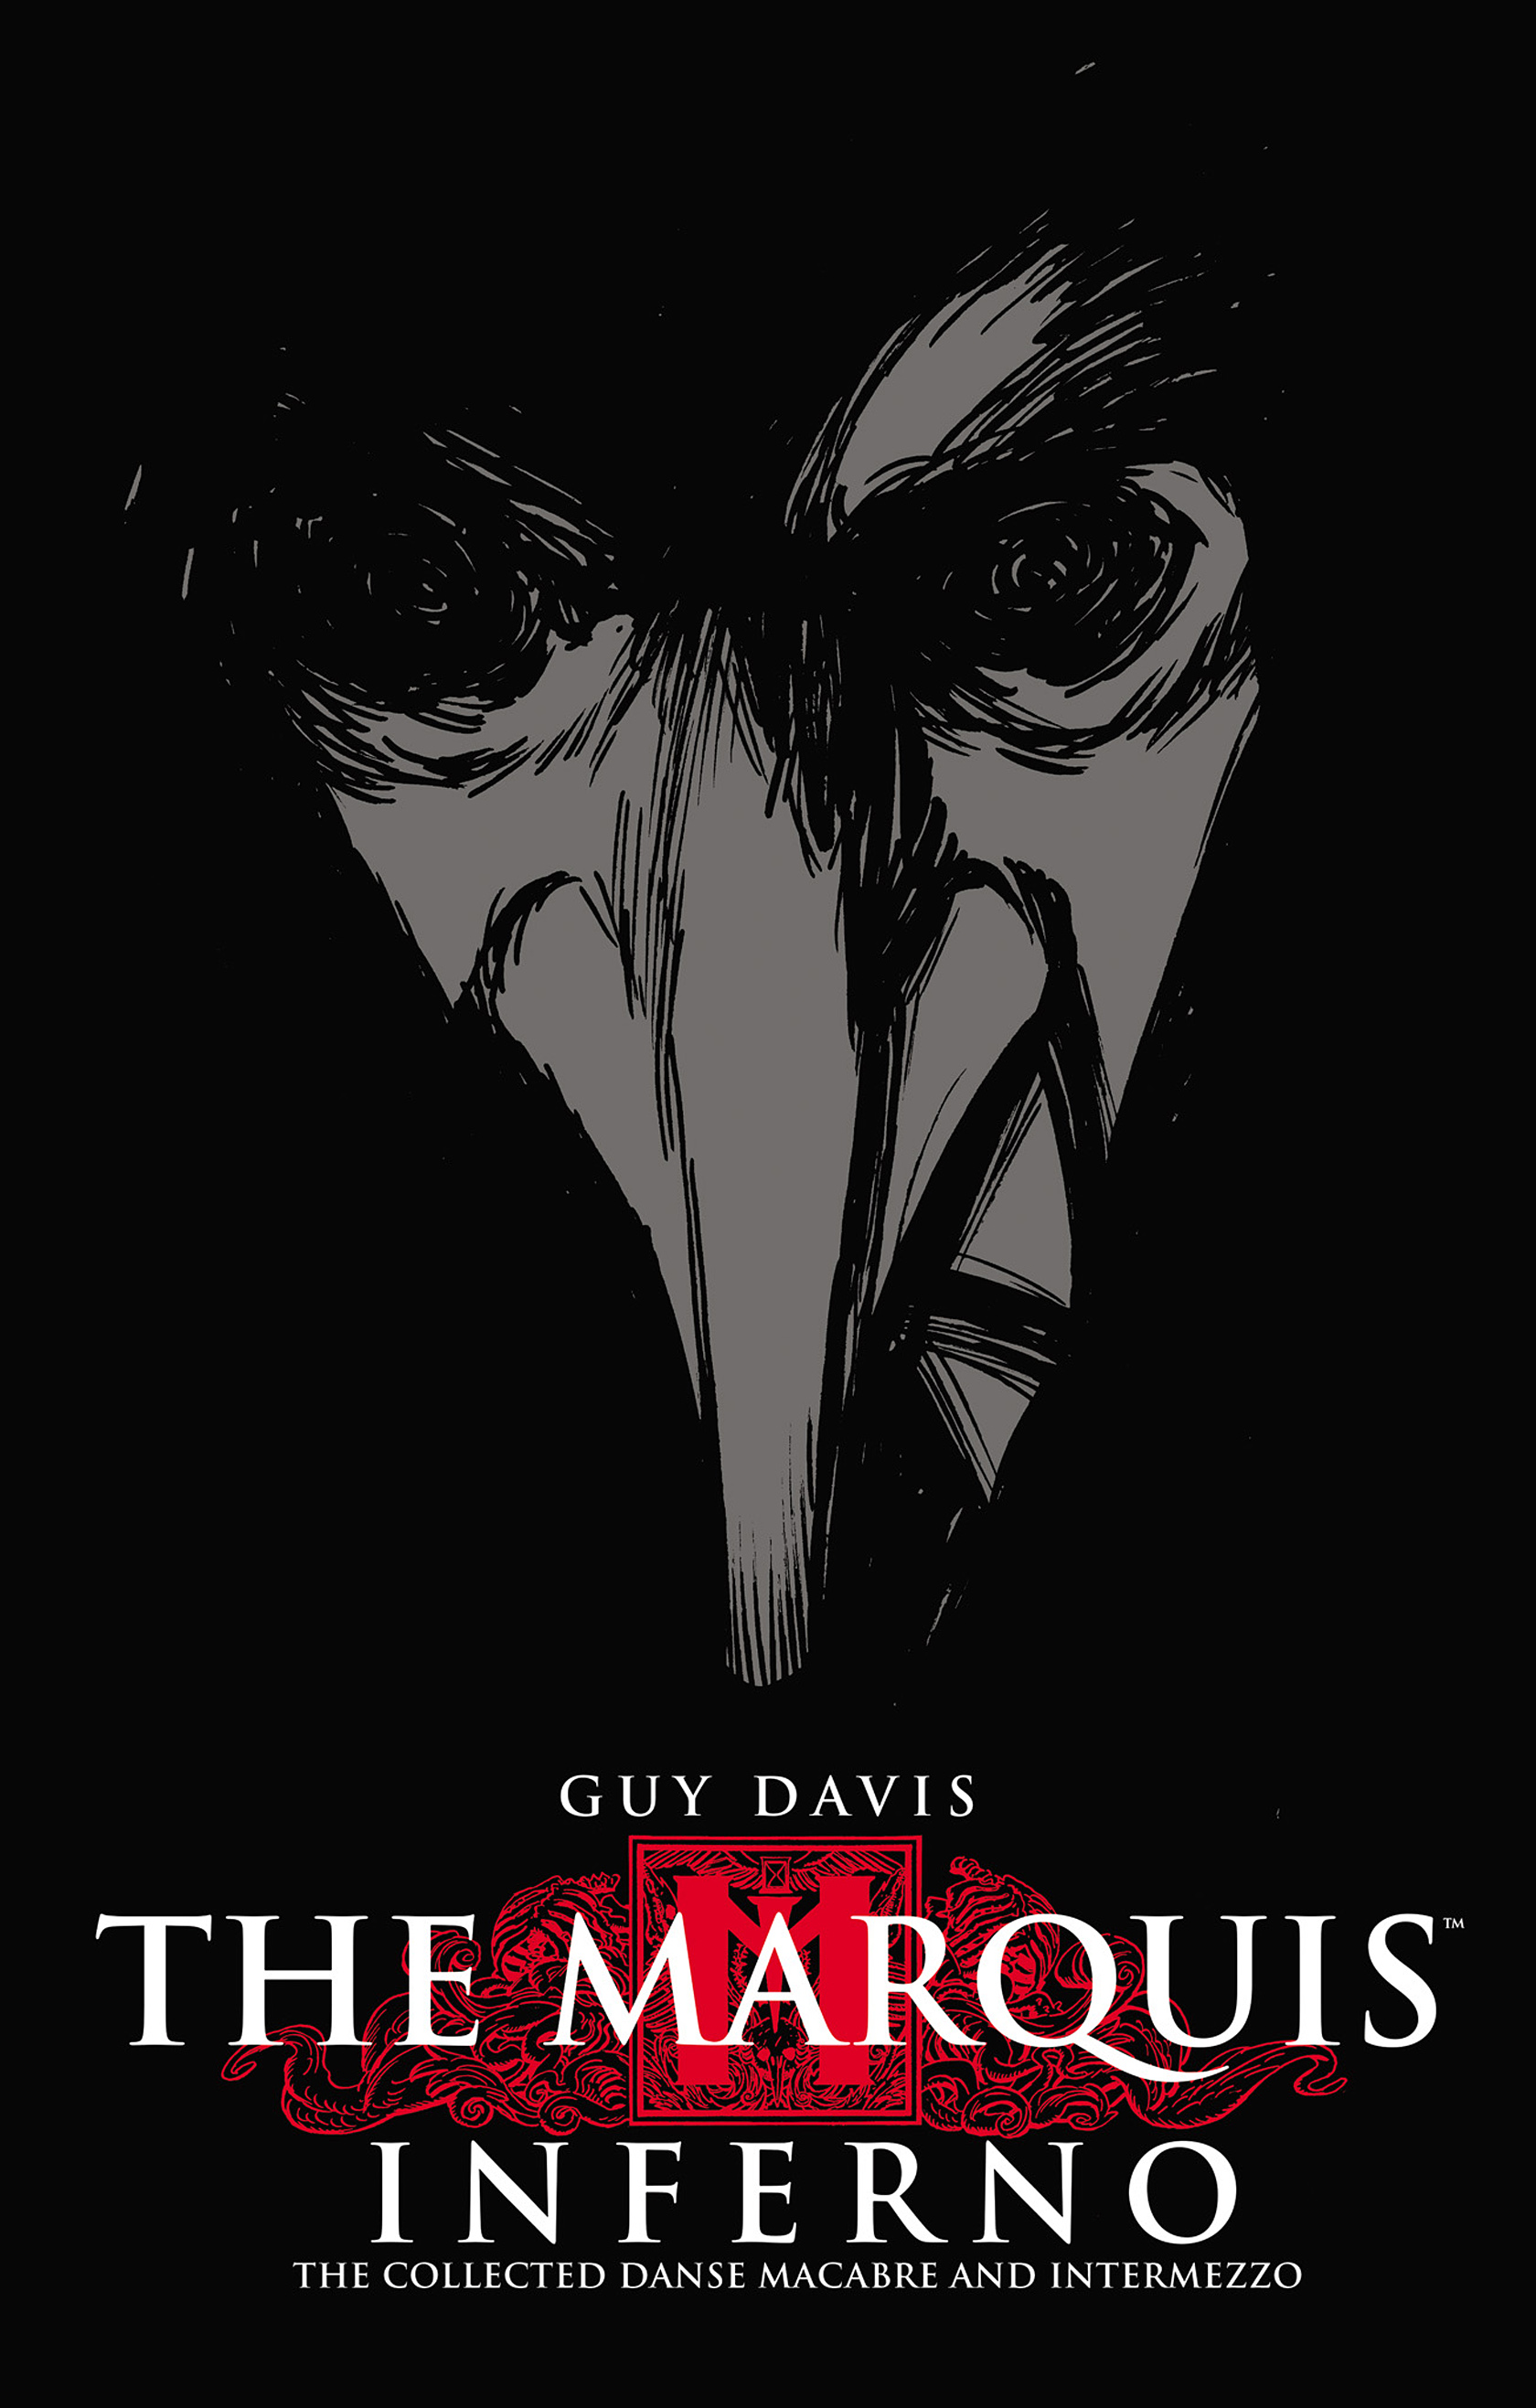 Read online The Marquis comic -  Issue # TPB - 1